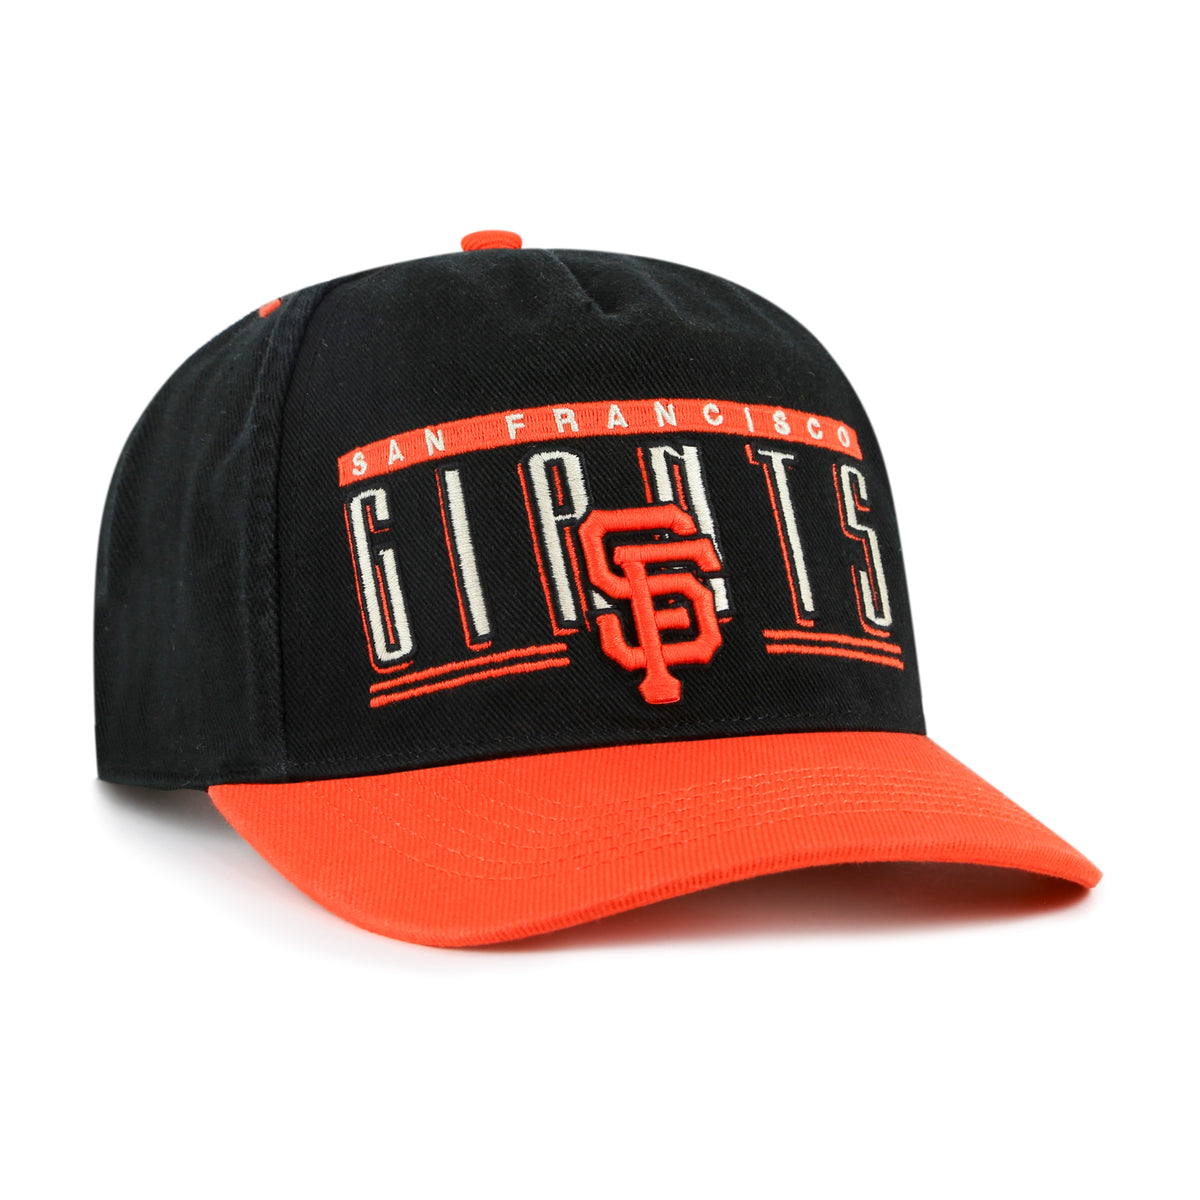 SAN FRANCISCO GIANTS COOPERSTO DOUBLE HEADER BASELINE '47 HITCH